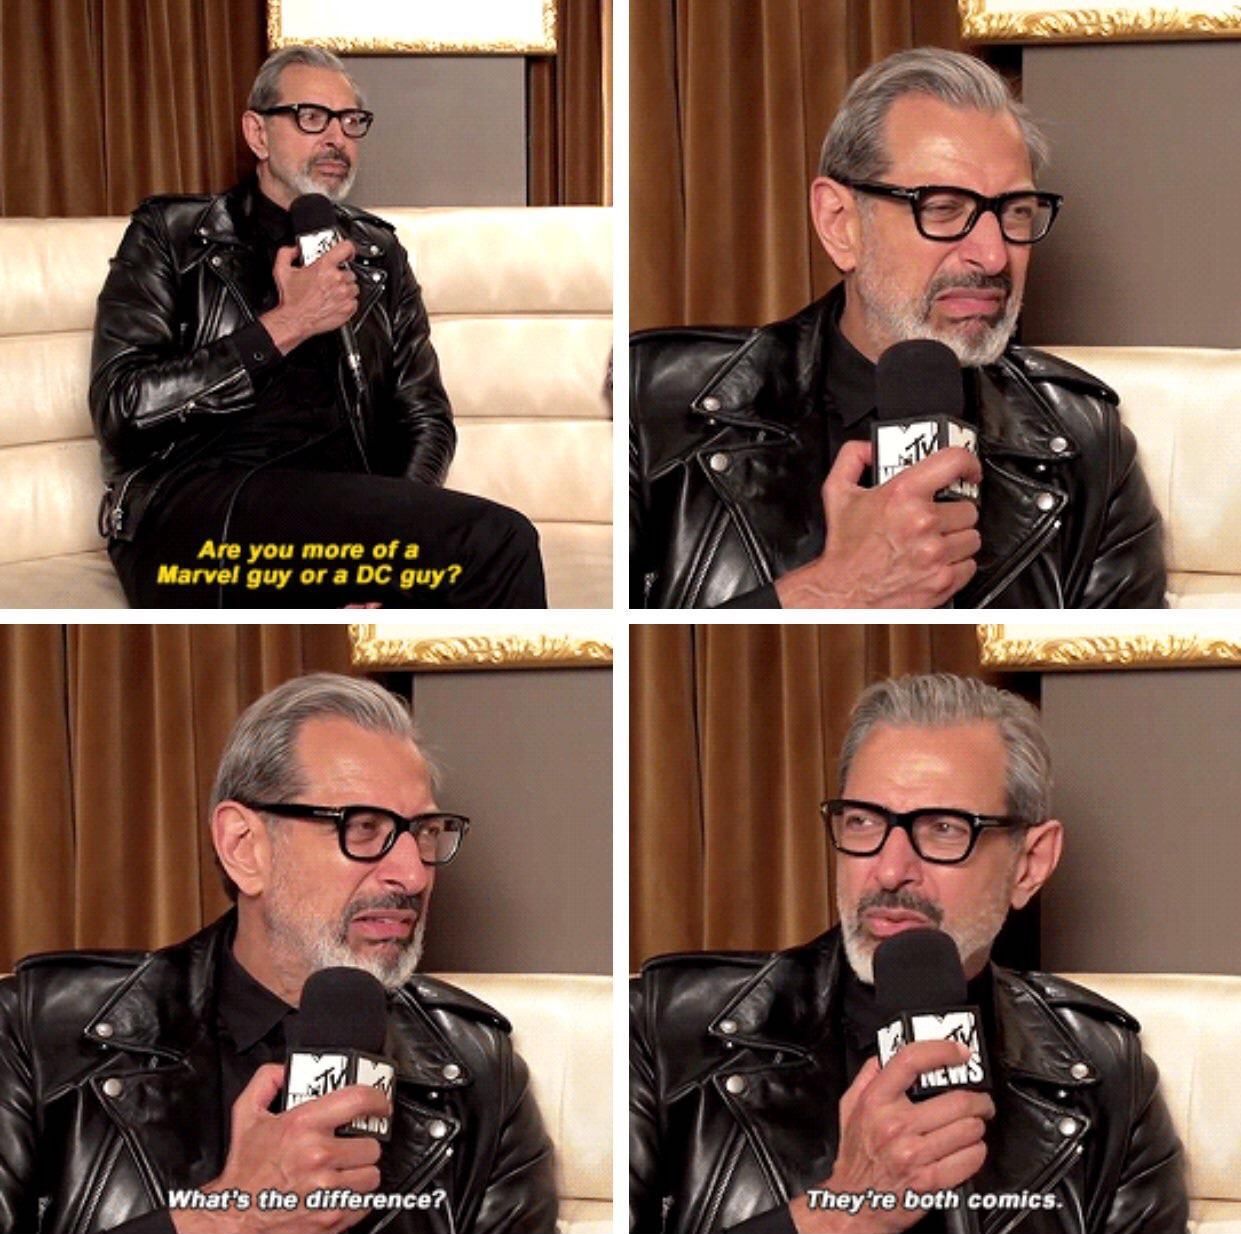 jeff goldblum marvel or dc - Daun Are you more of a Marvel guy or a Dc guy? Tu What's the difference? They're both comics.